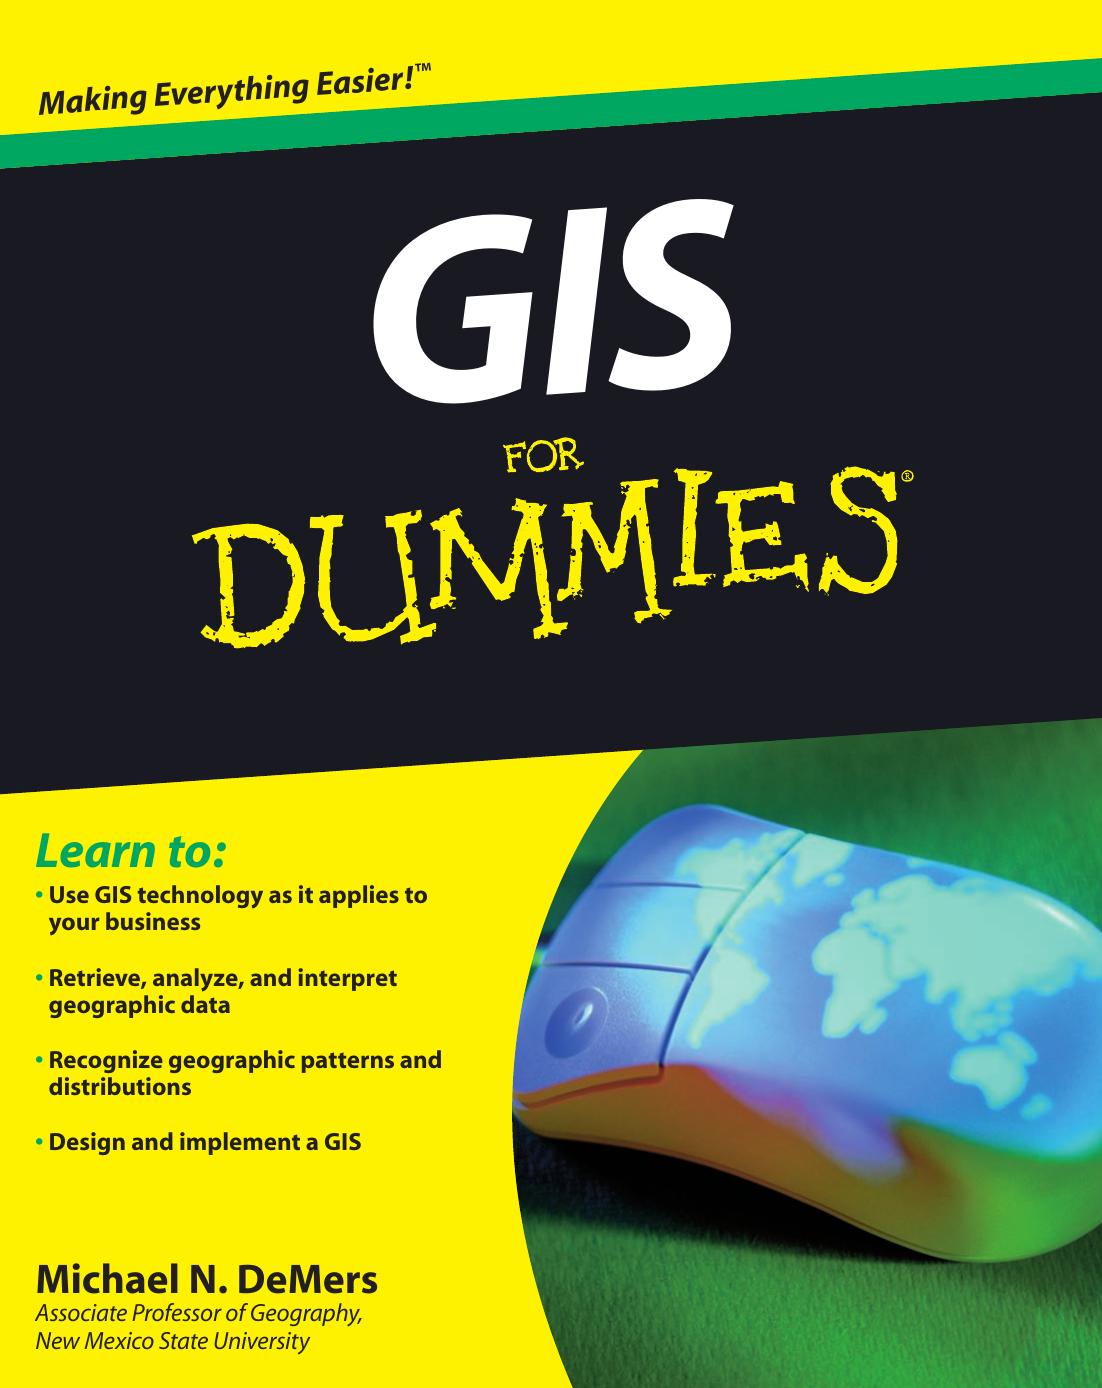 GIS For Dummies by Michael N. DeMers